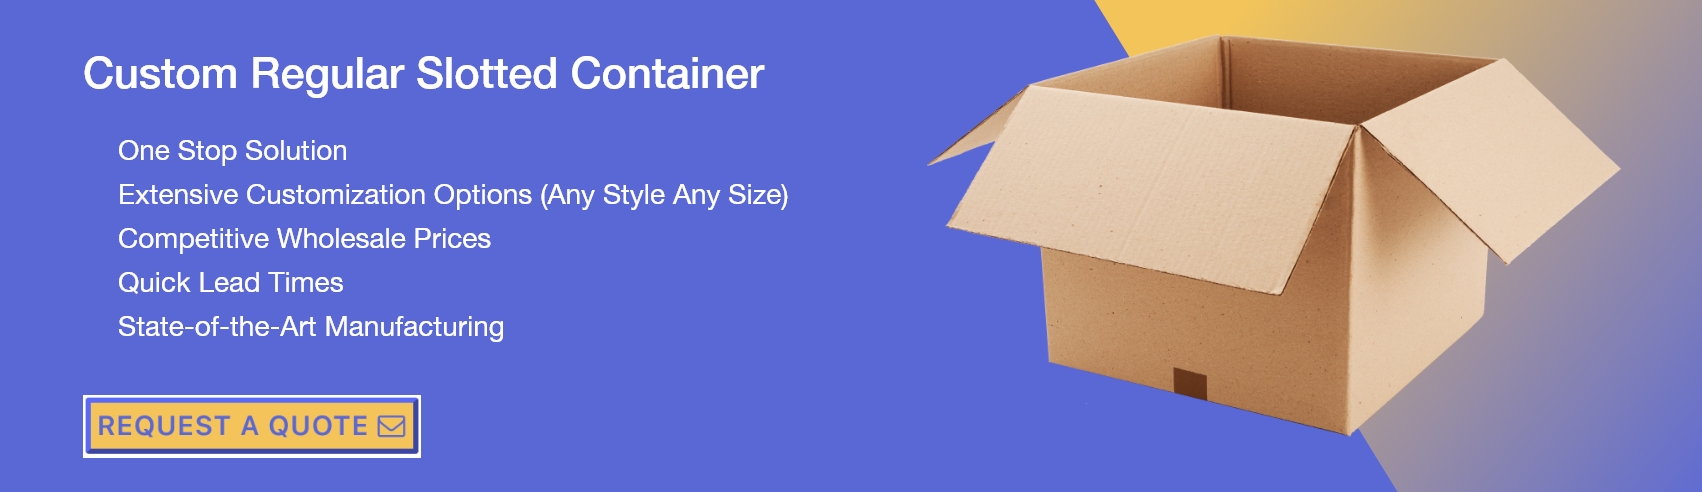 Custom Regular Slotted Container